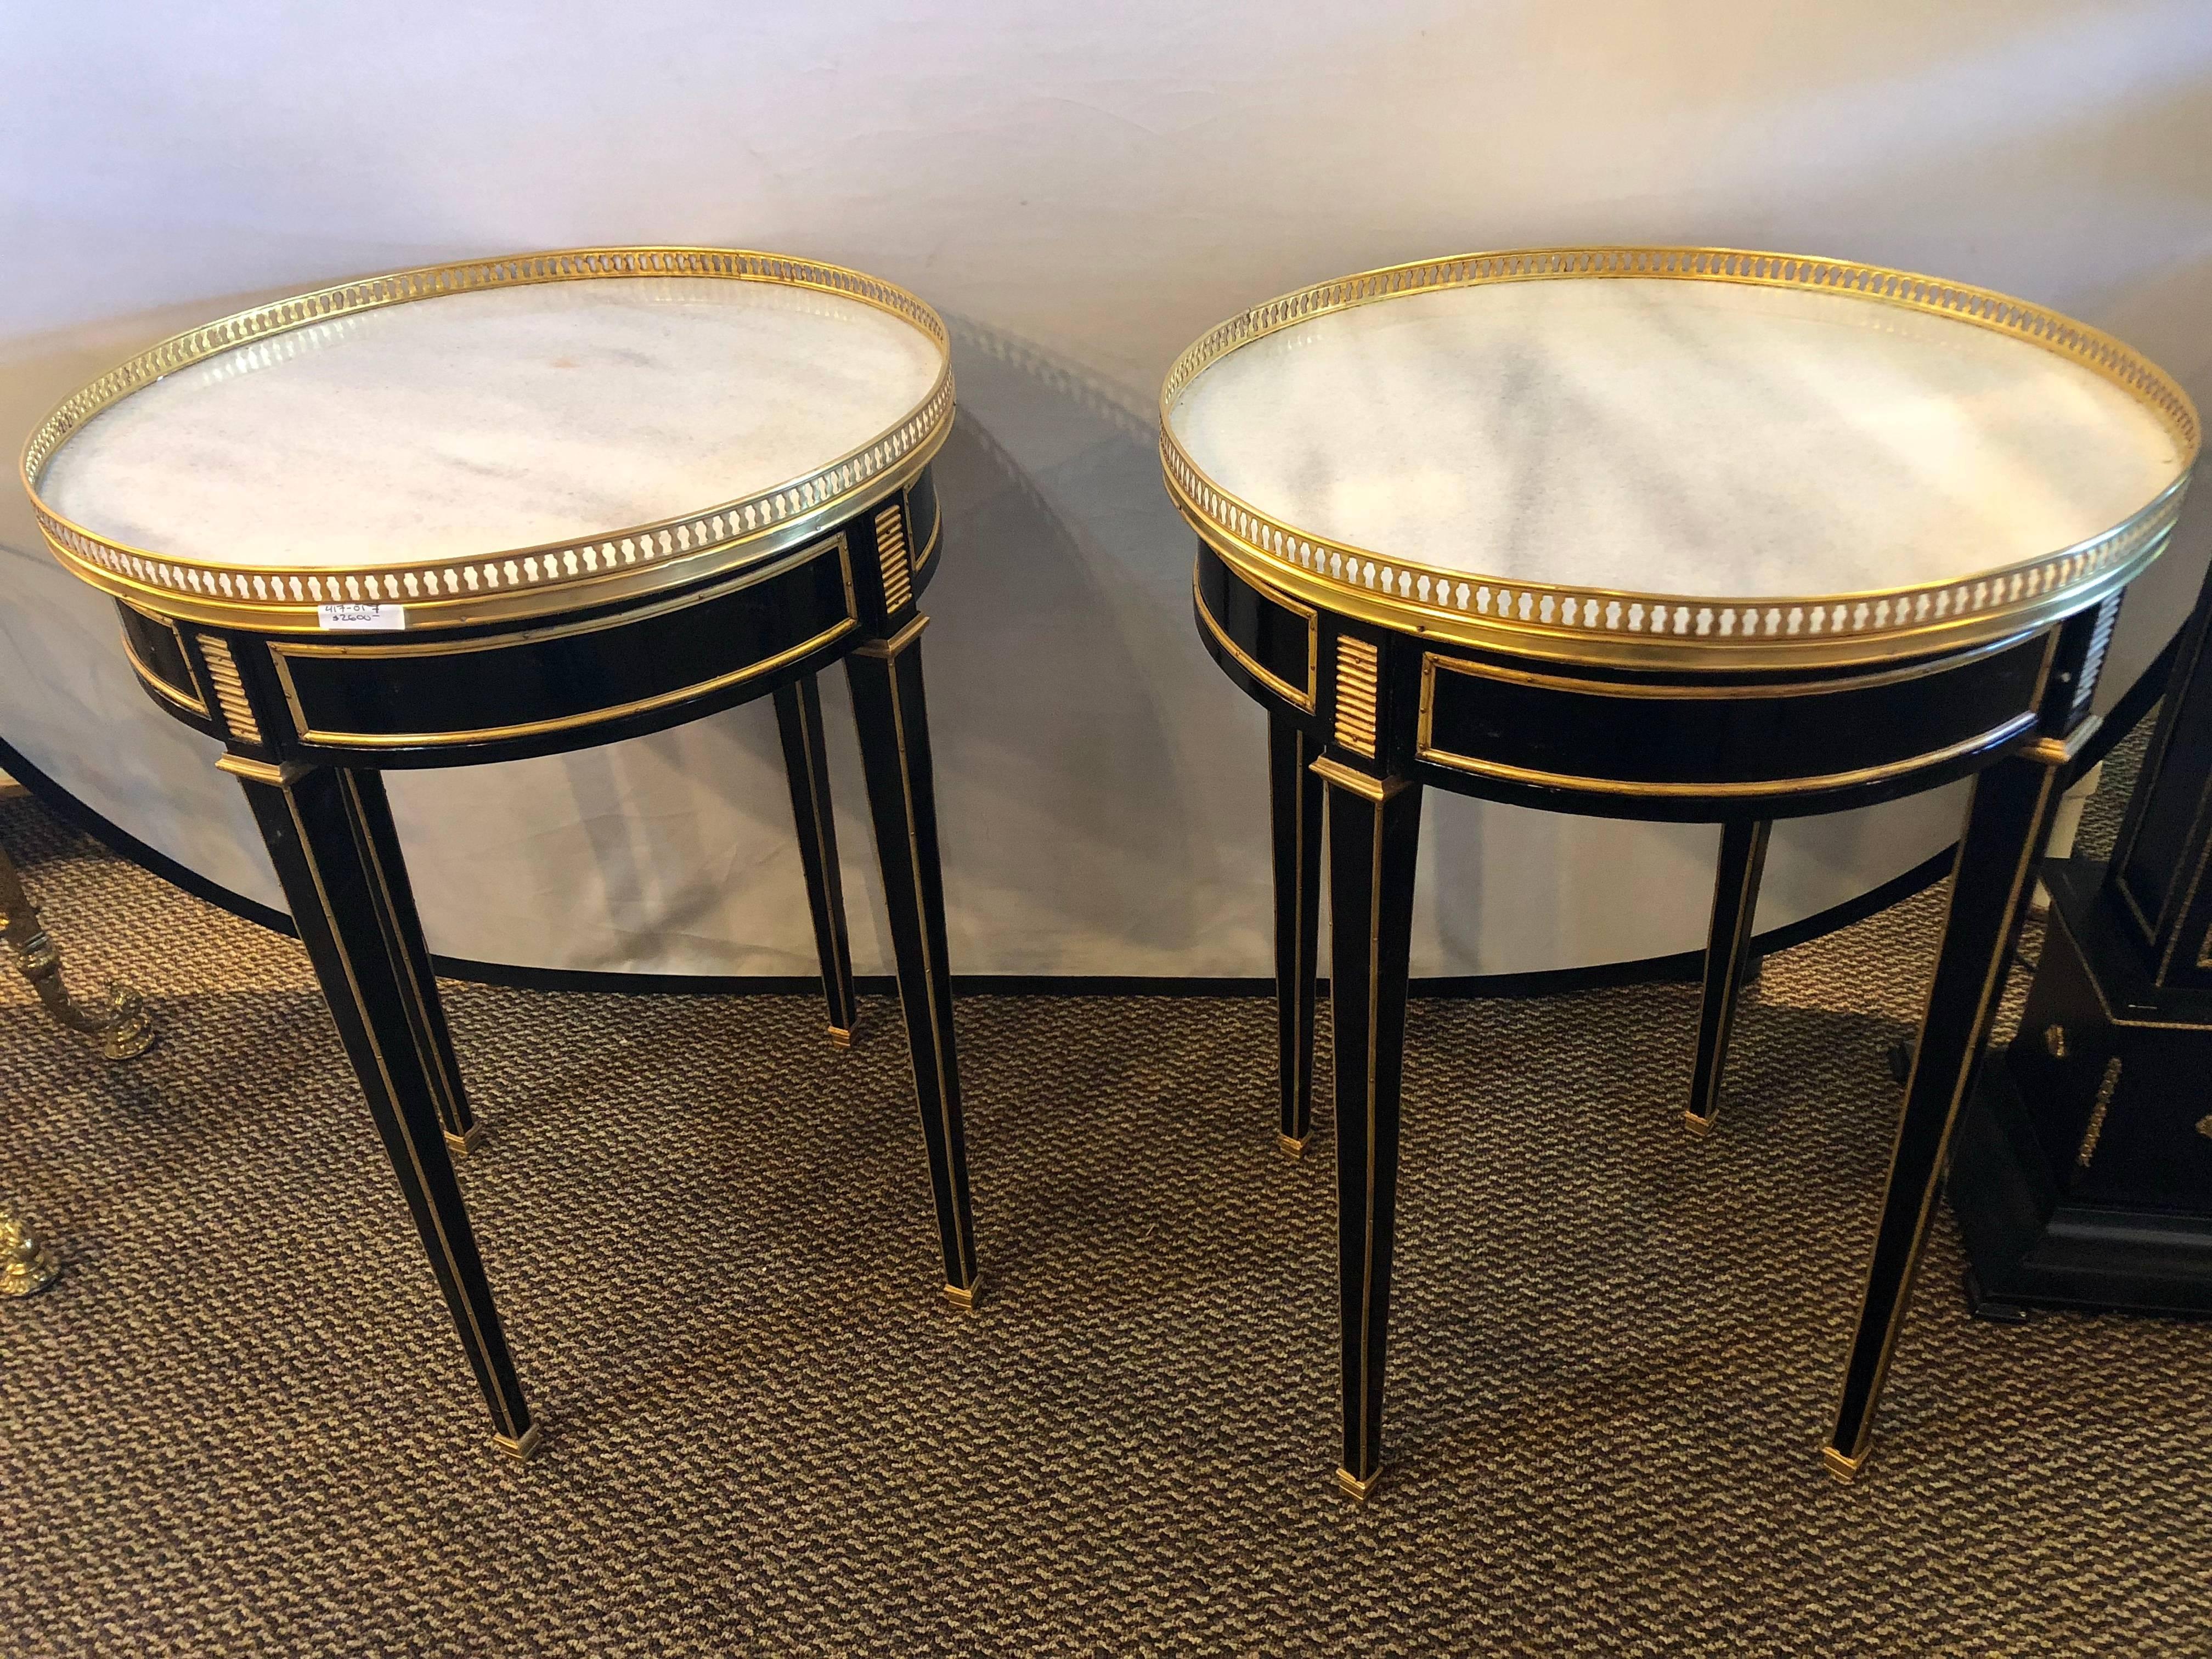 This is a fine pair of Louis XVI style ebony pierced bronze galleried bouillotte / end tables in the manner of Maison Jansen depict the Hollywood Regency era at its height. On bronze sabots the ebony tapering legs have this very rare and fine bronze